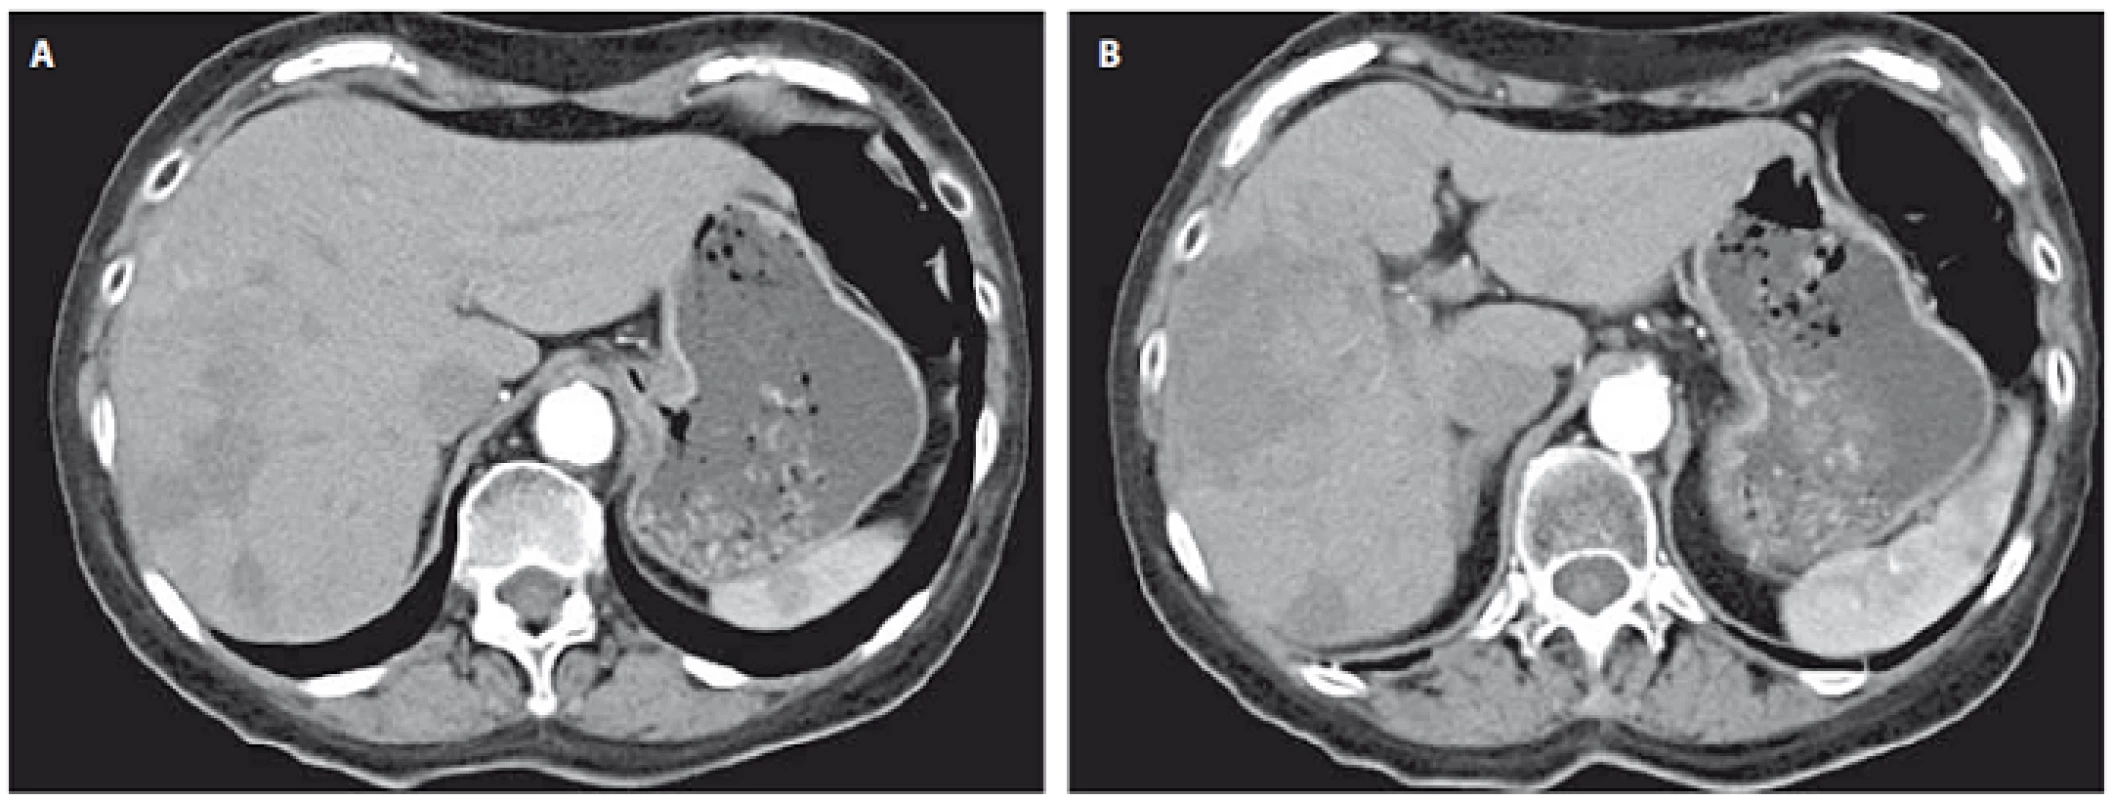 CT image prior to first TACE procedure (A) and after second TACE procedure showing partial right lobe necrosis (B).